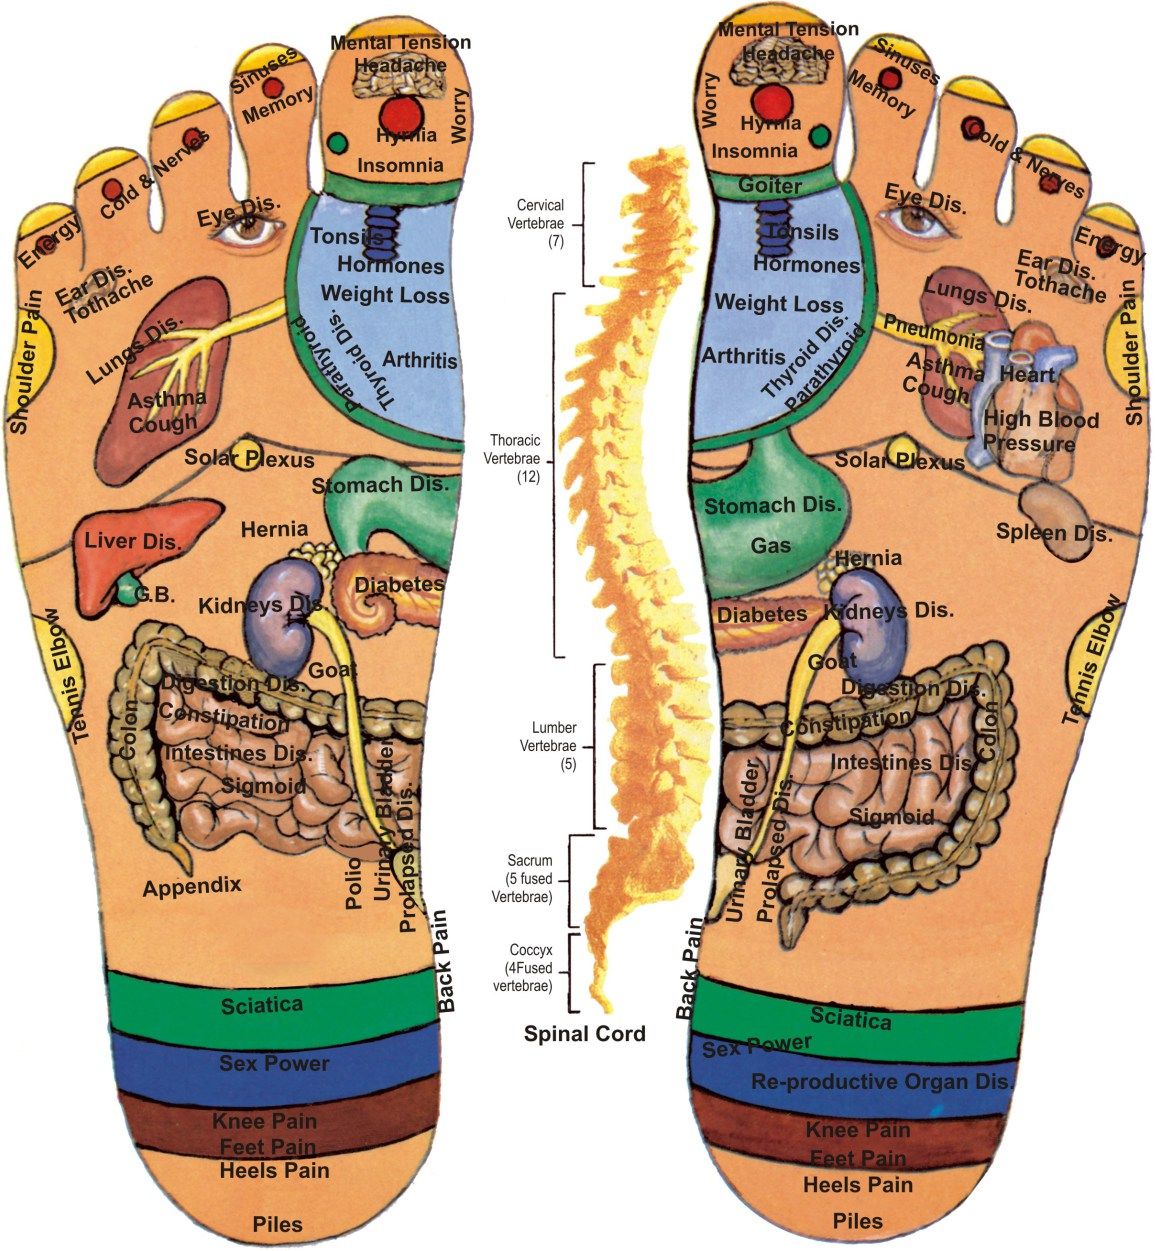 https://amritamasaj.ro/What about foot reflexology or foot massage on the soles?